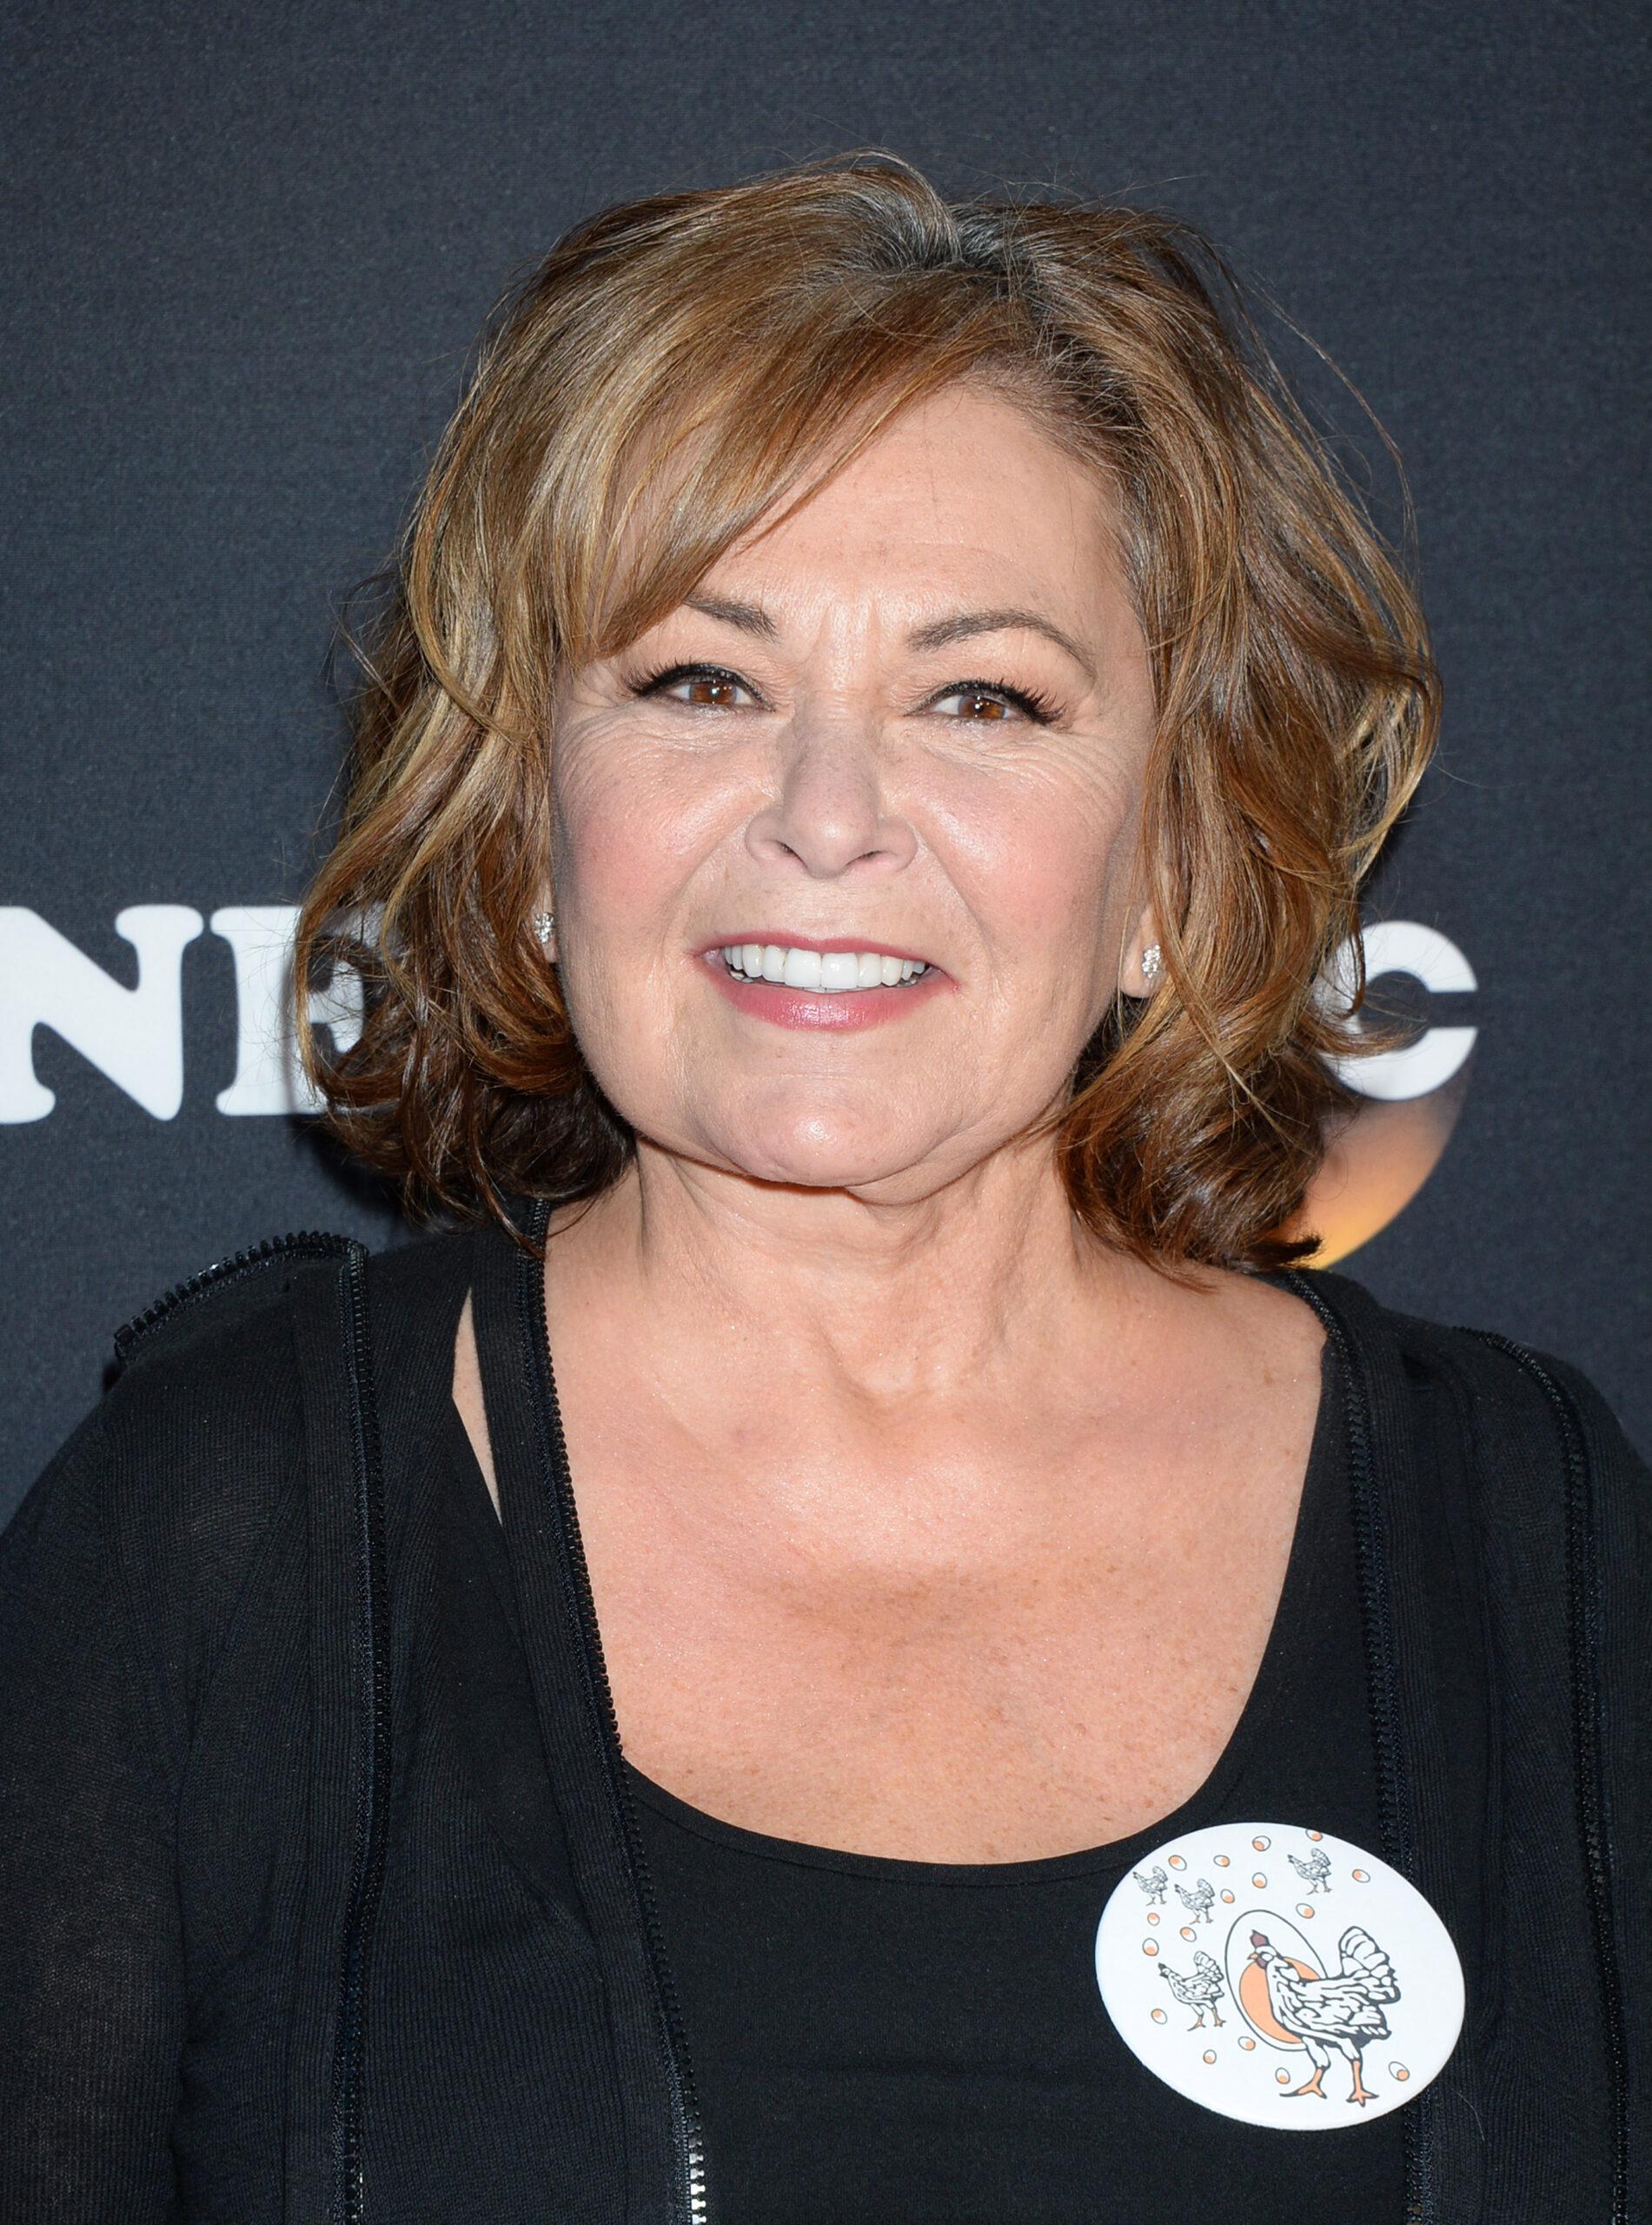 Fans Call Roseanne Barr A Clown For Calling Trump 'The Twice Elected President' 